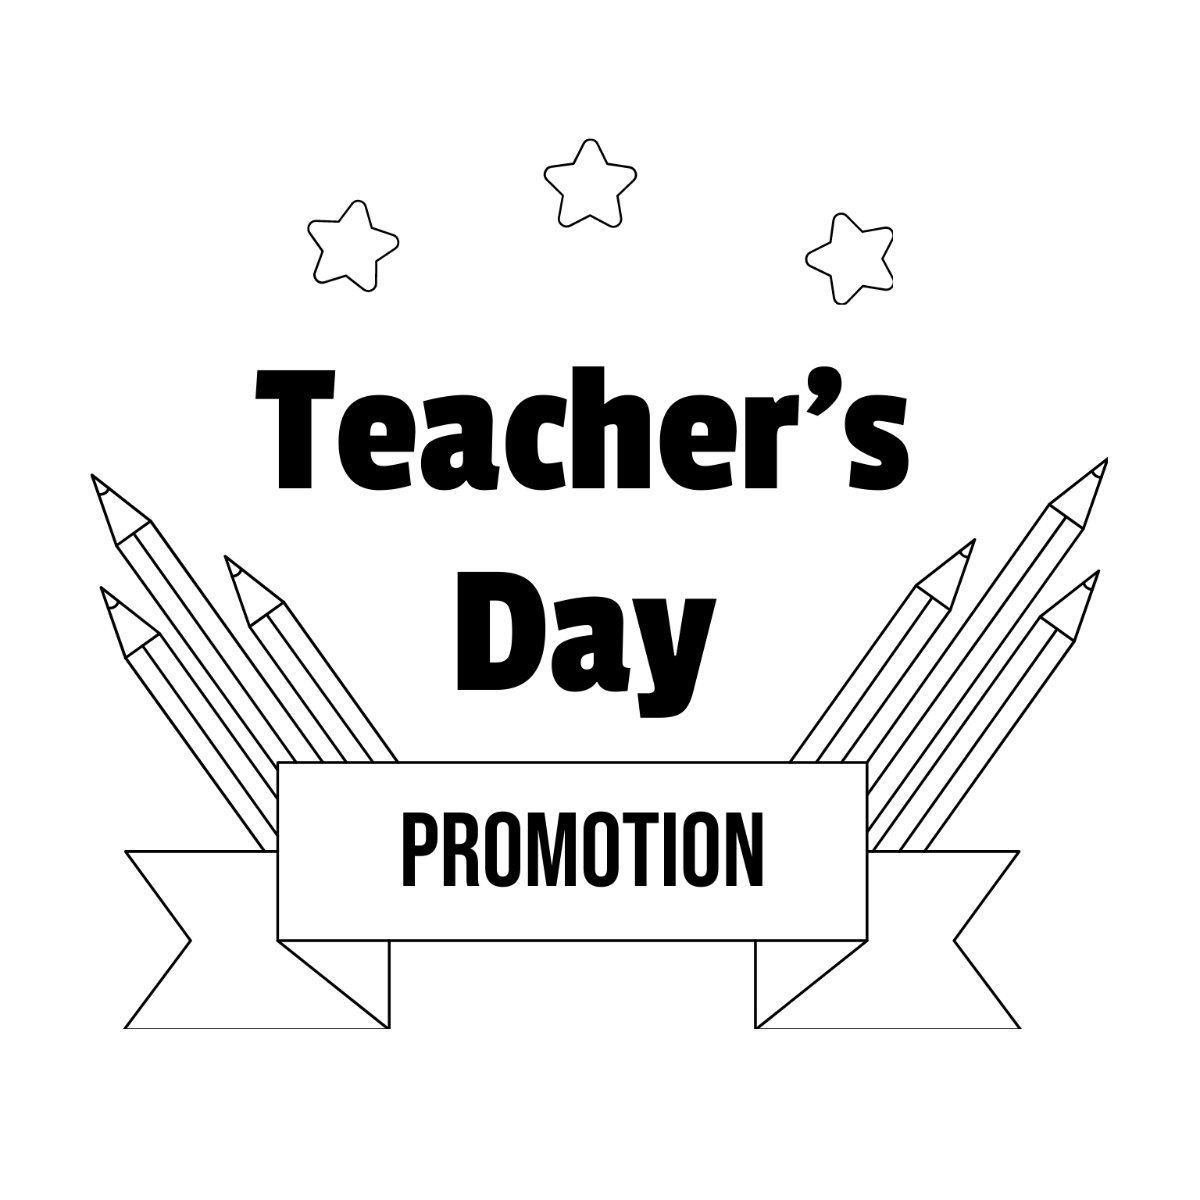 Teachers Day Promotion Drawing Template